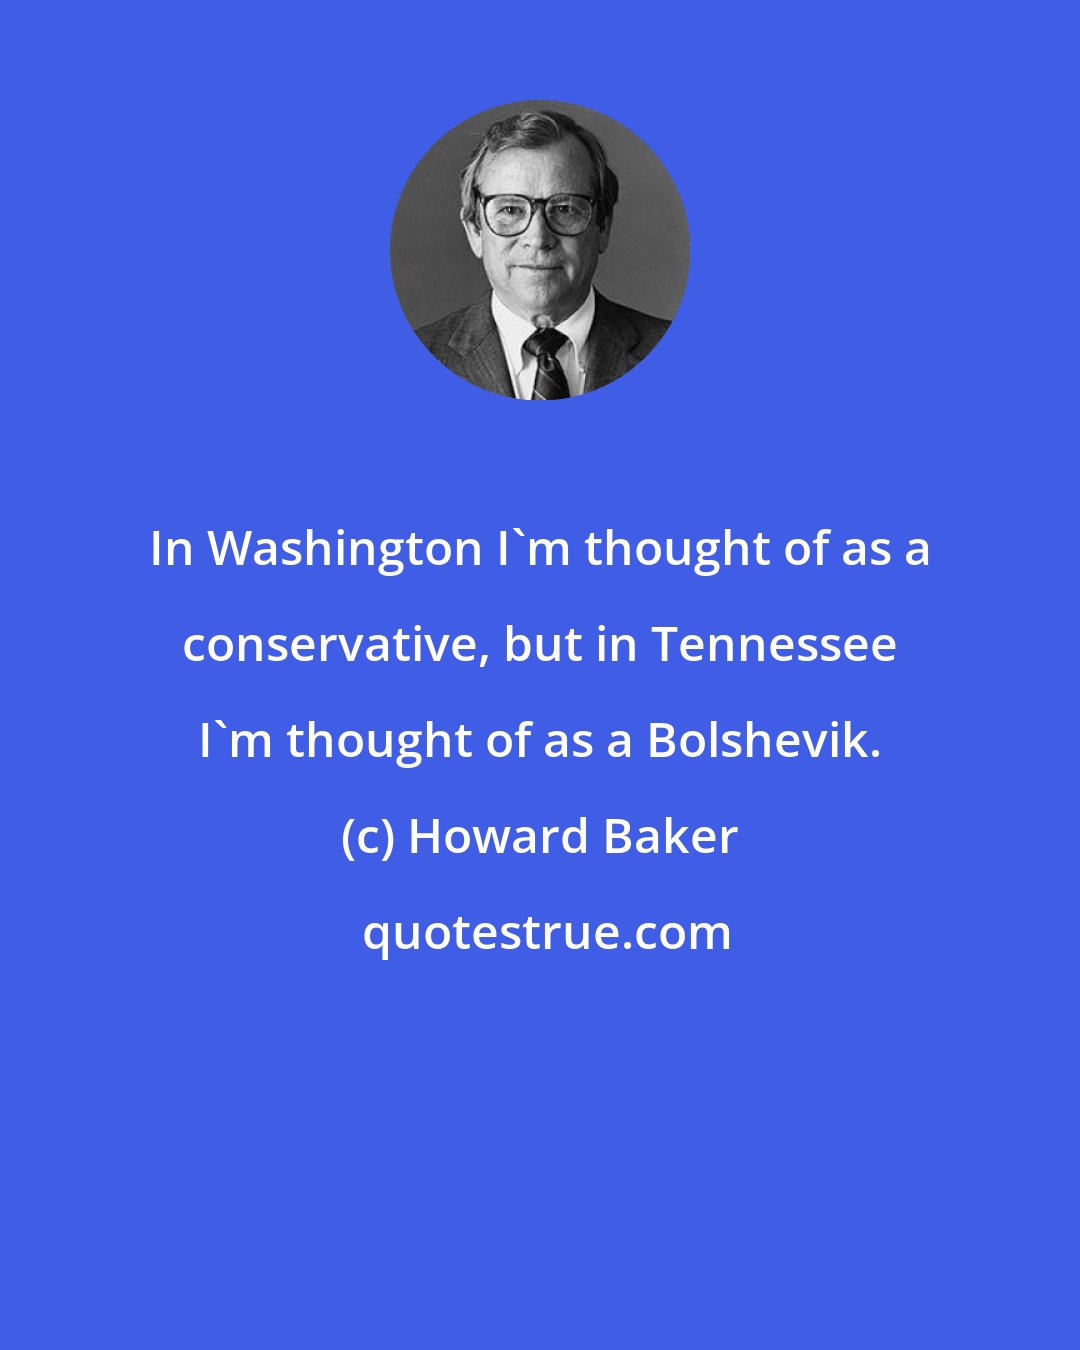 Howard Baker: In Washington I'm thought of as a conservative, but in Tennessee I'm thought of as a Bolshevik.